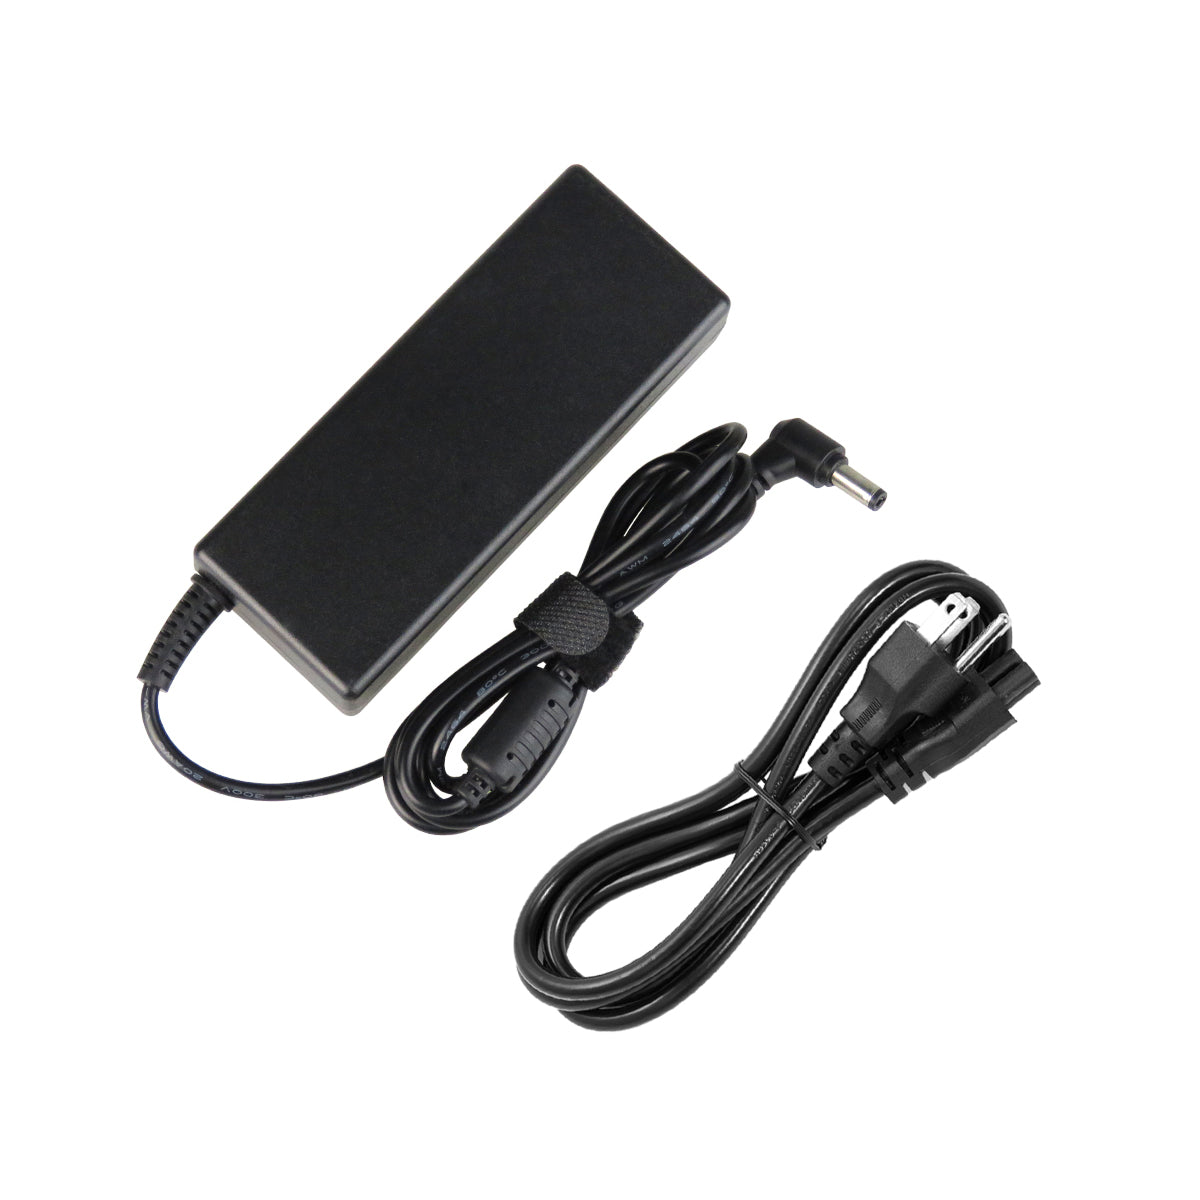 AC Adapter Charger for ASUS X54C-BBK13 Notebook.